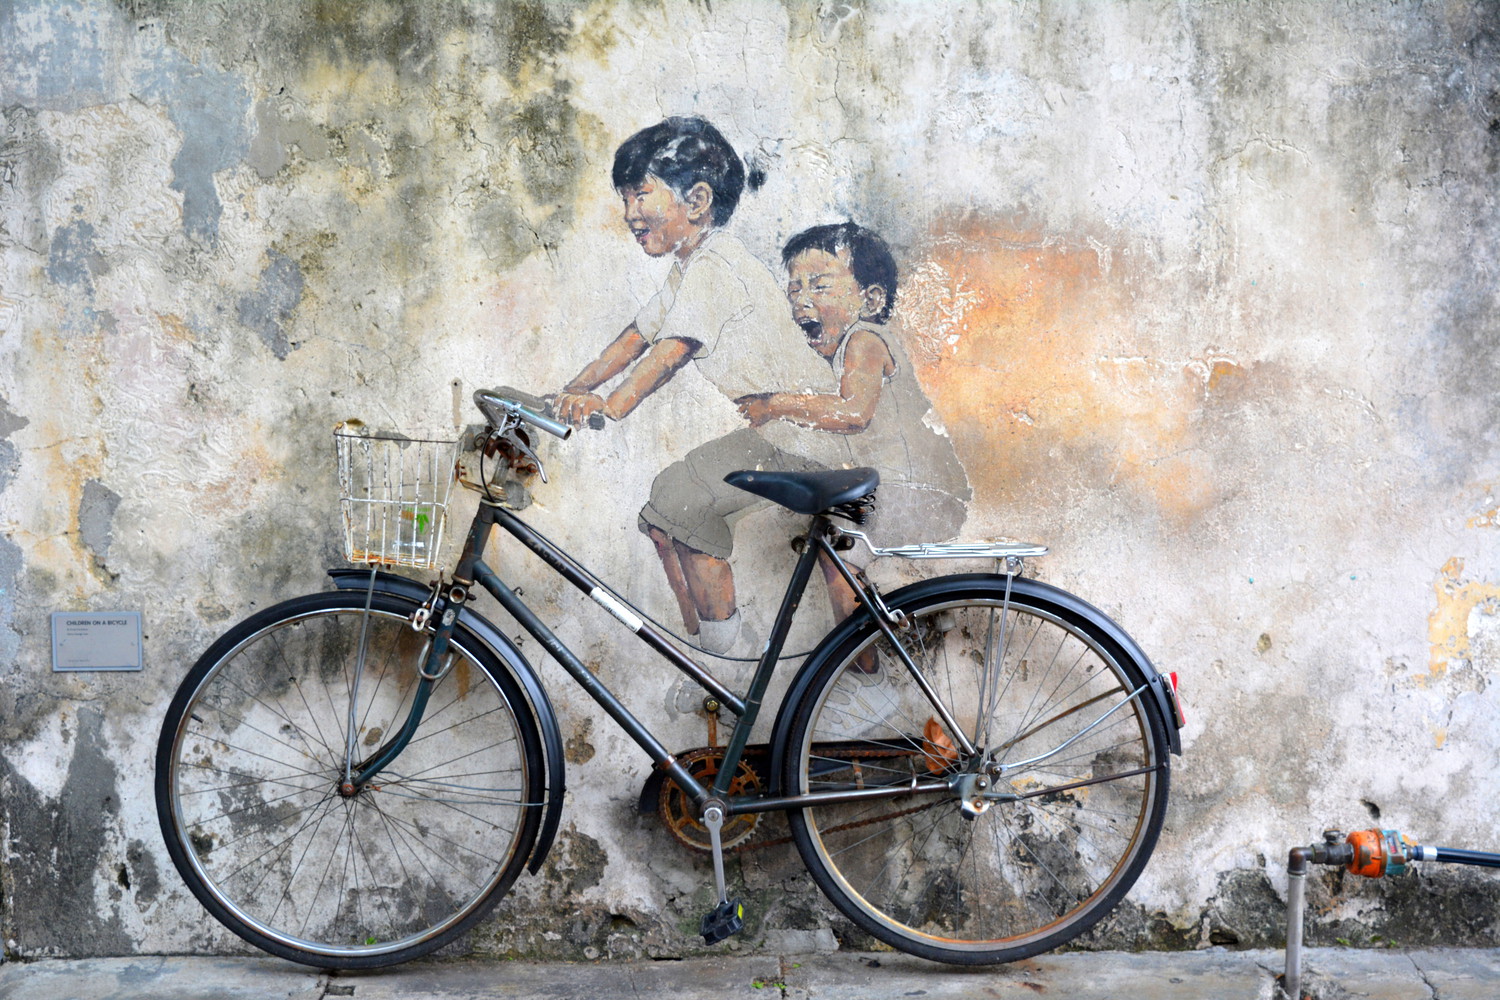 A mural with a little girl and an even smaller boy painted on a wall with an actual physical bicycle attached to the wall such that the painted children appear to be sitting on the bicycle with the girl riding the bicycle and the boy sitting on the back seat